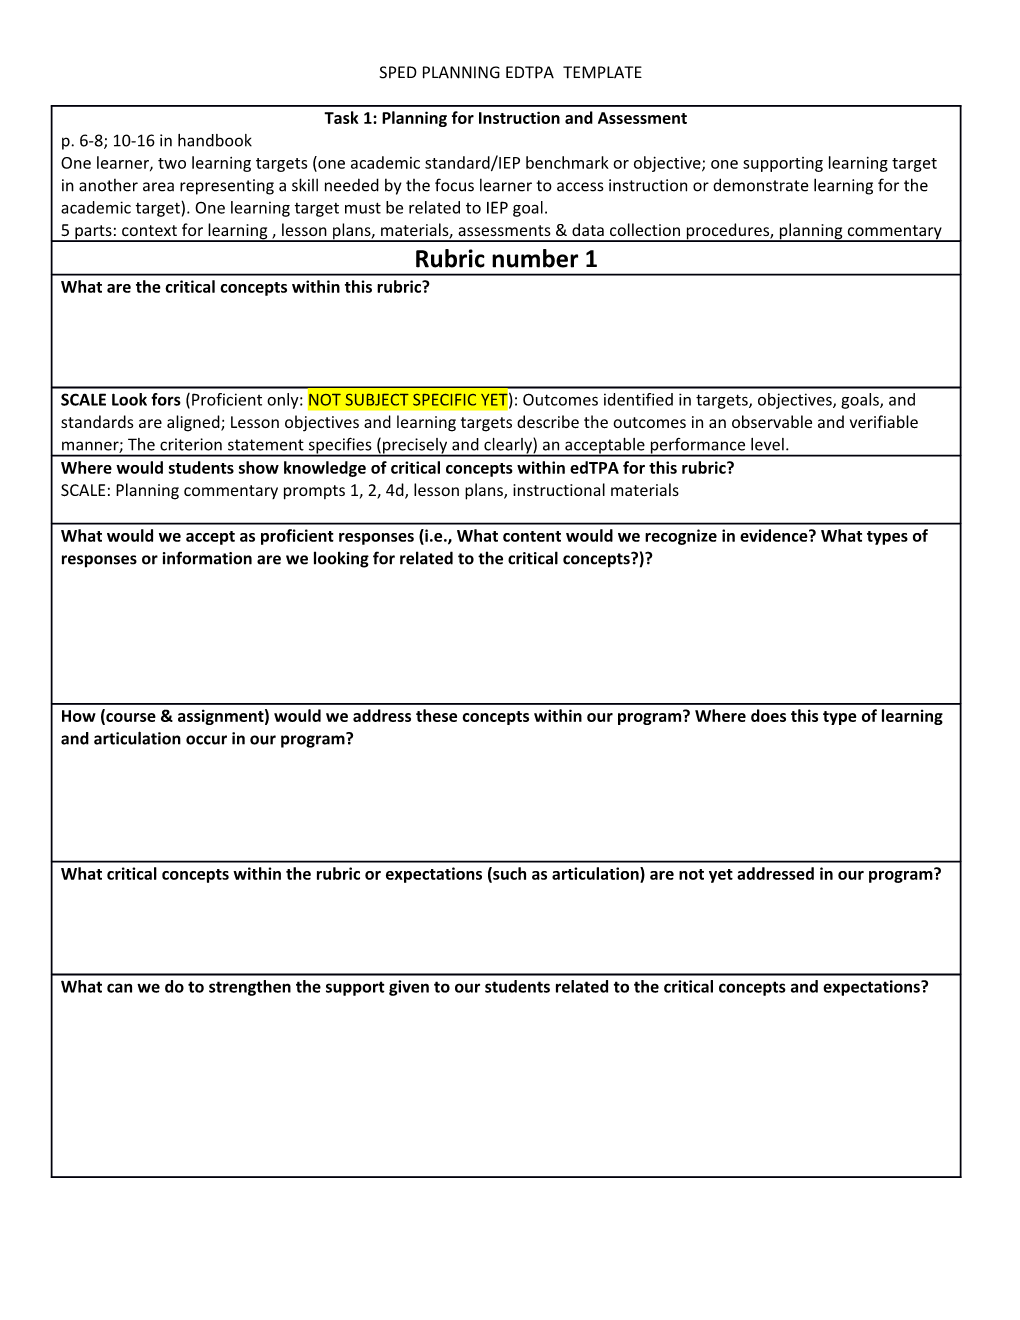 Sped Planning Edtpa Template